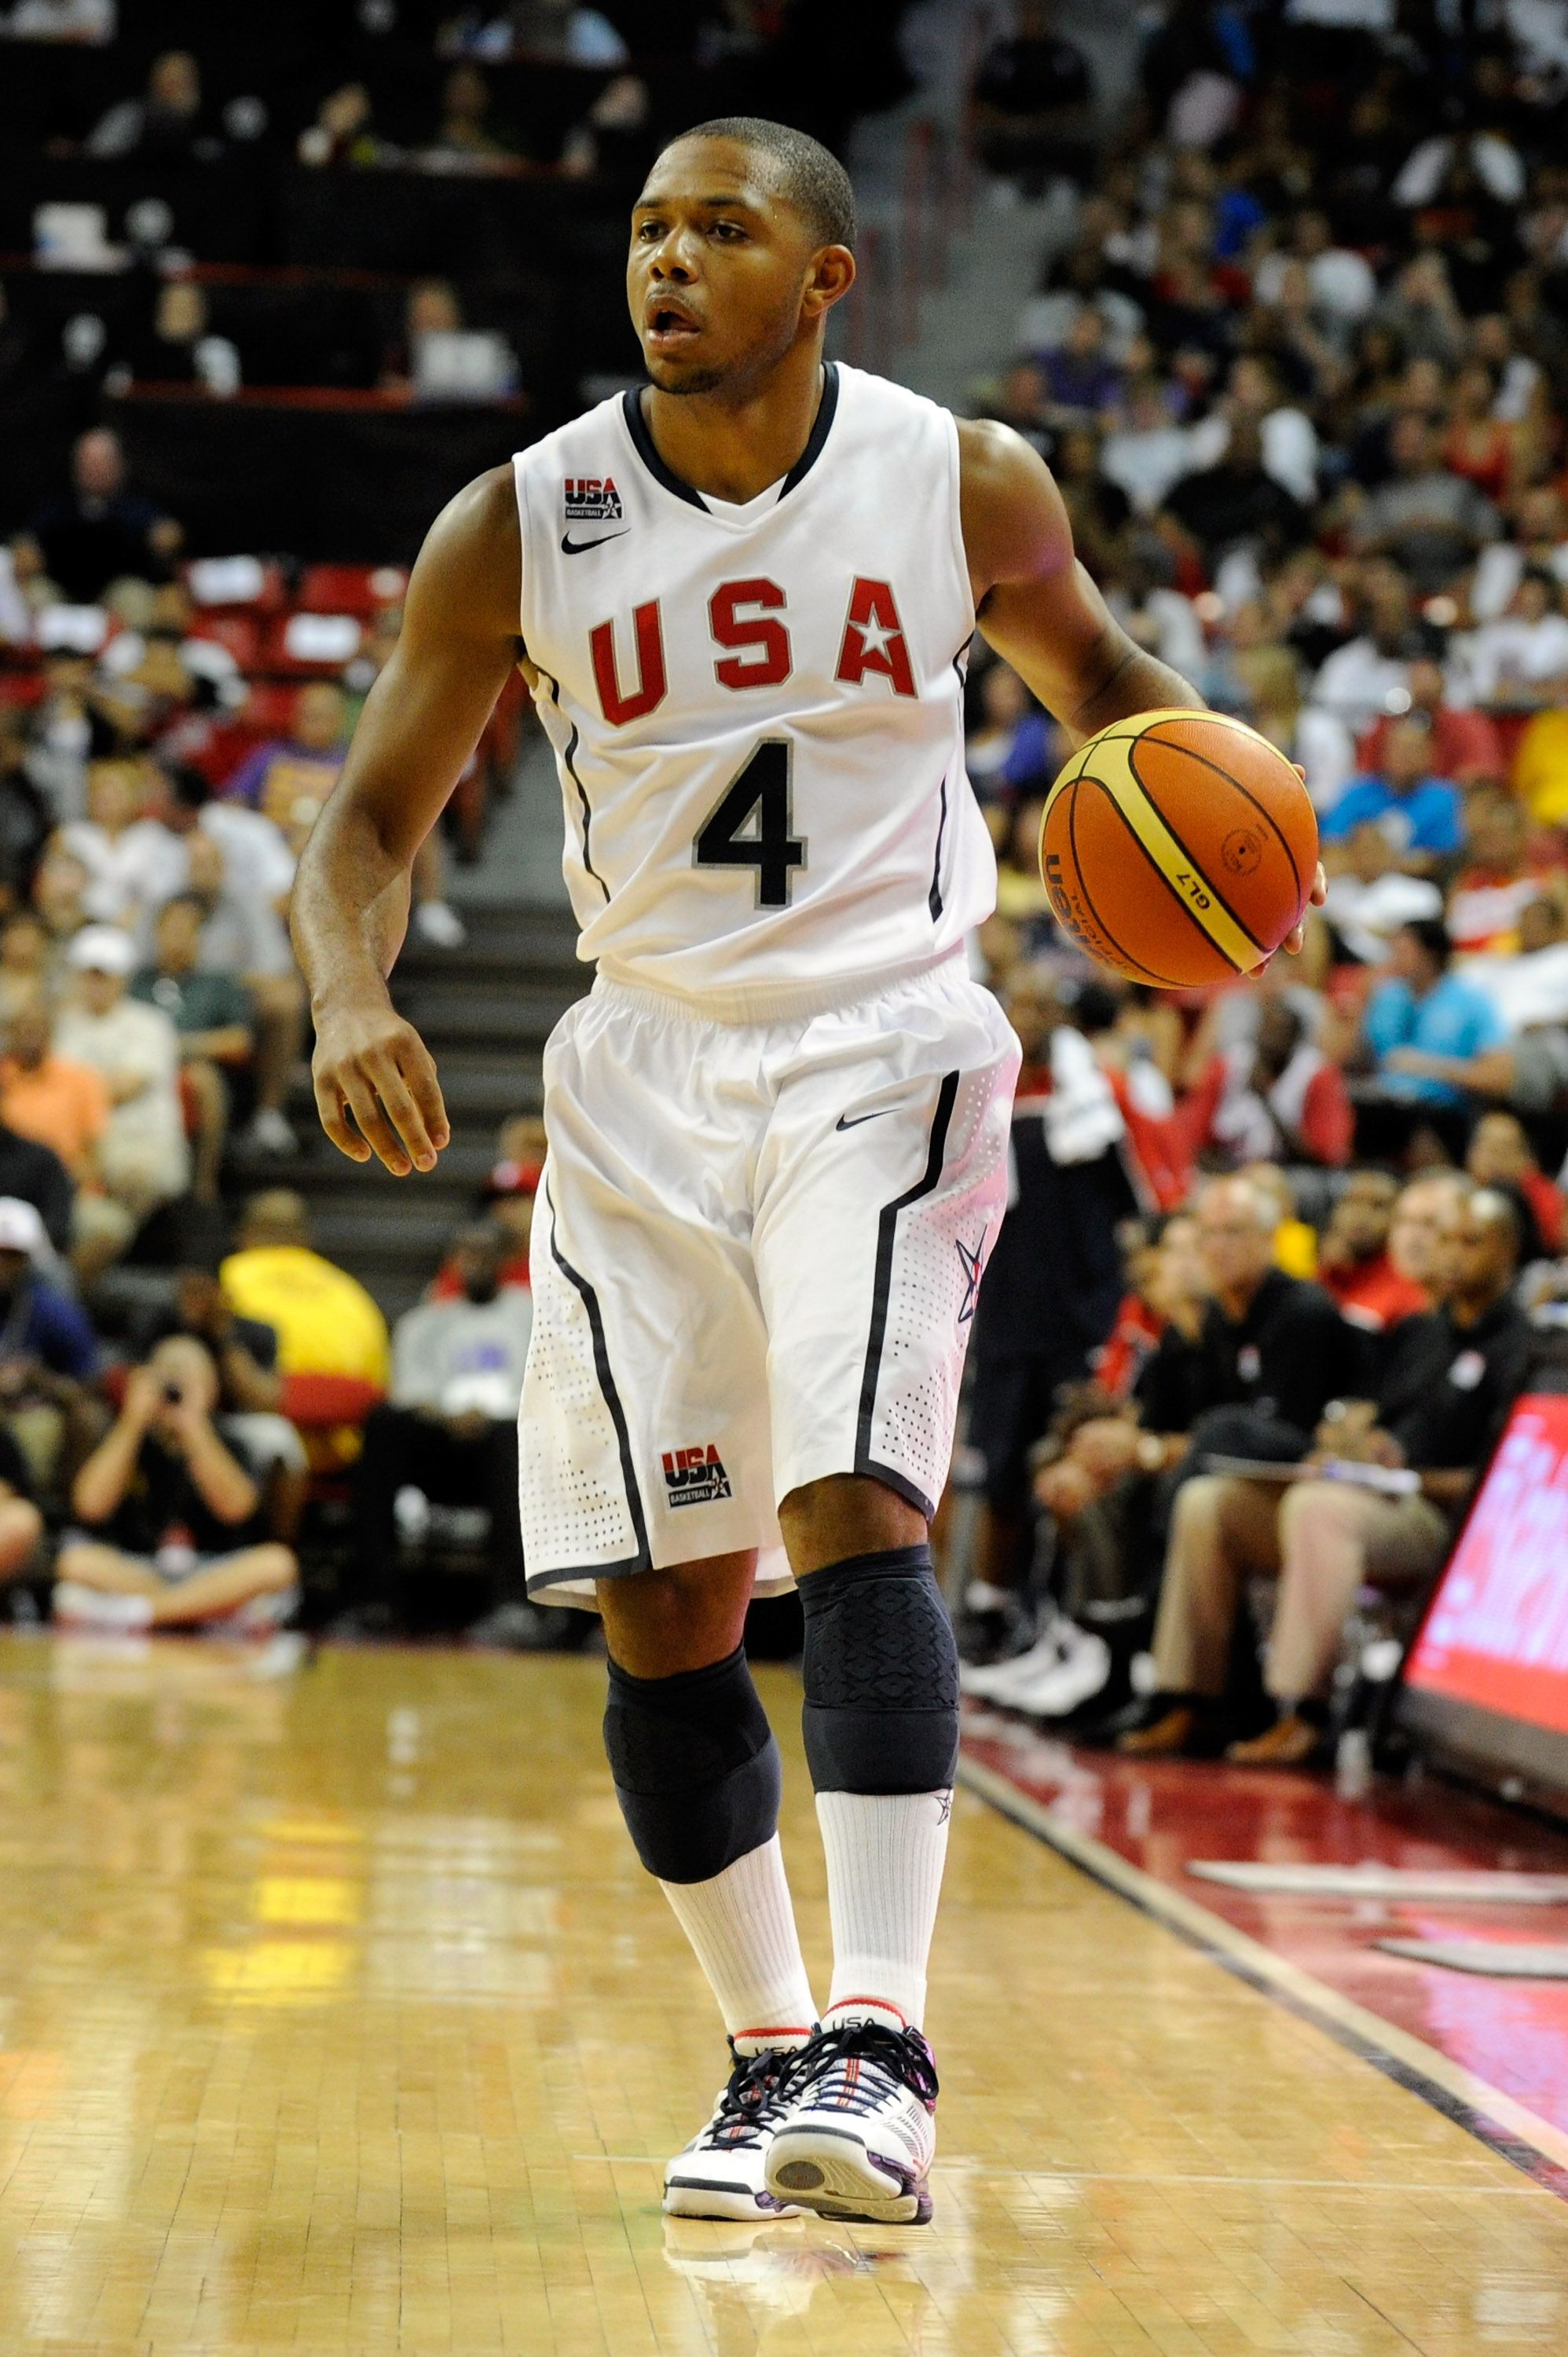 Did Rajon Rondo Withdraw From Team USA in Fear of Getting Cut